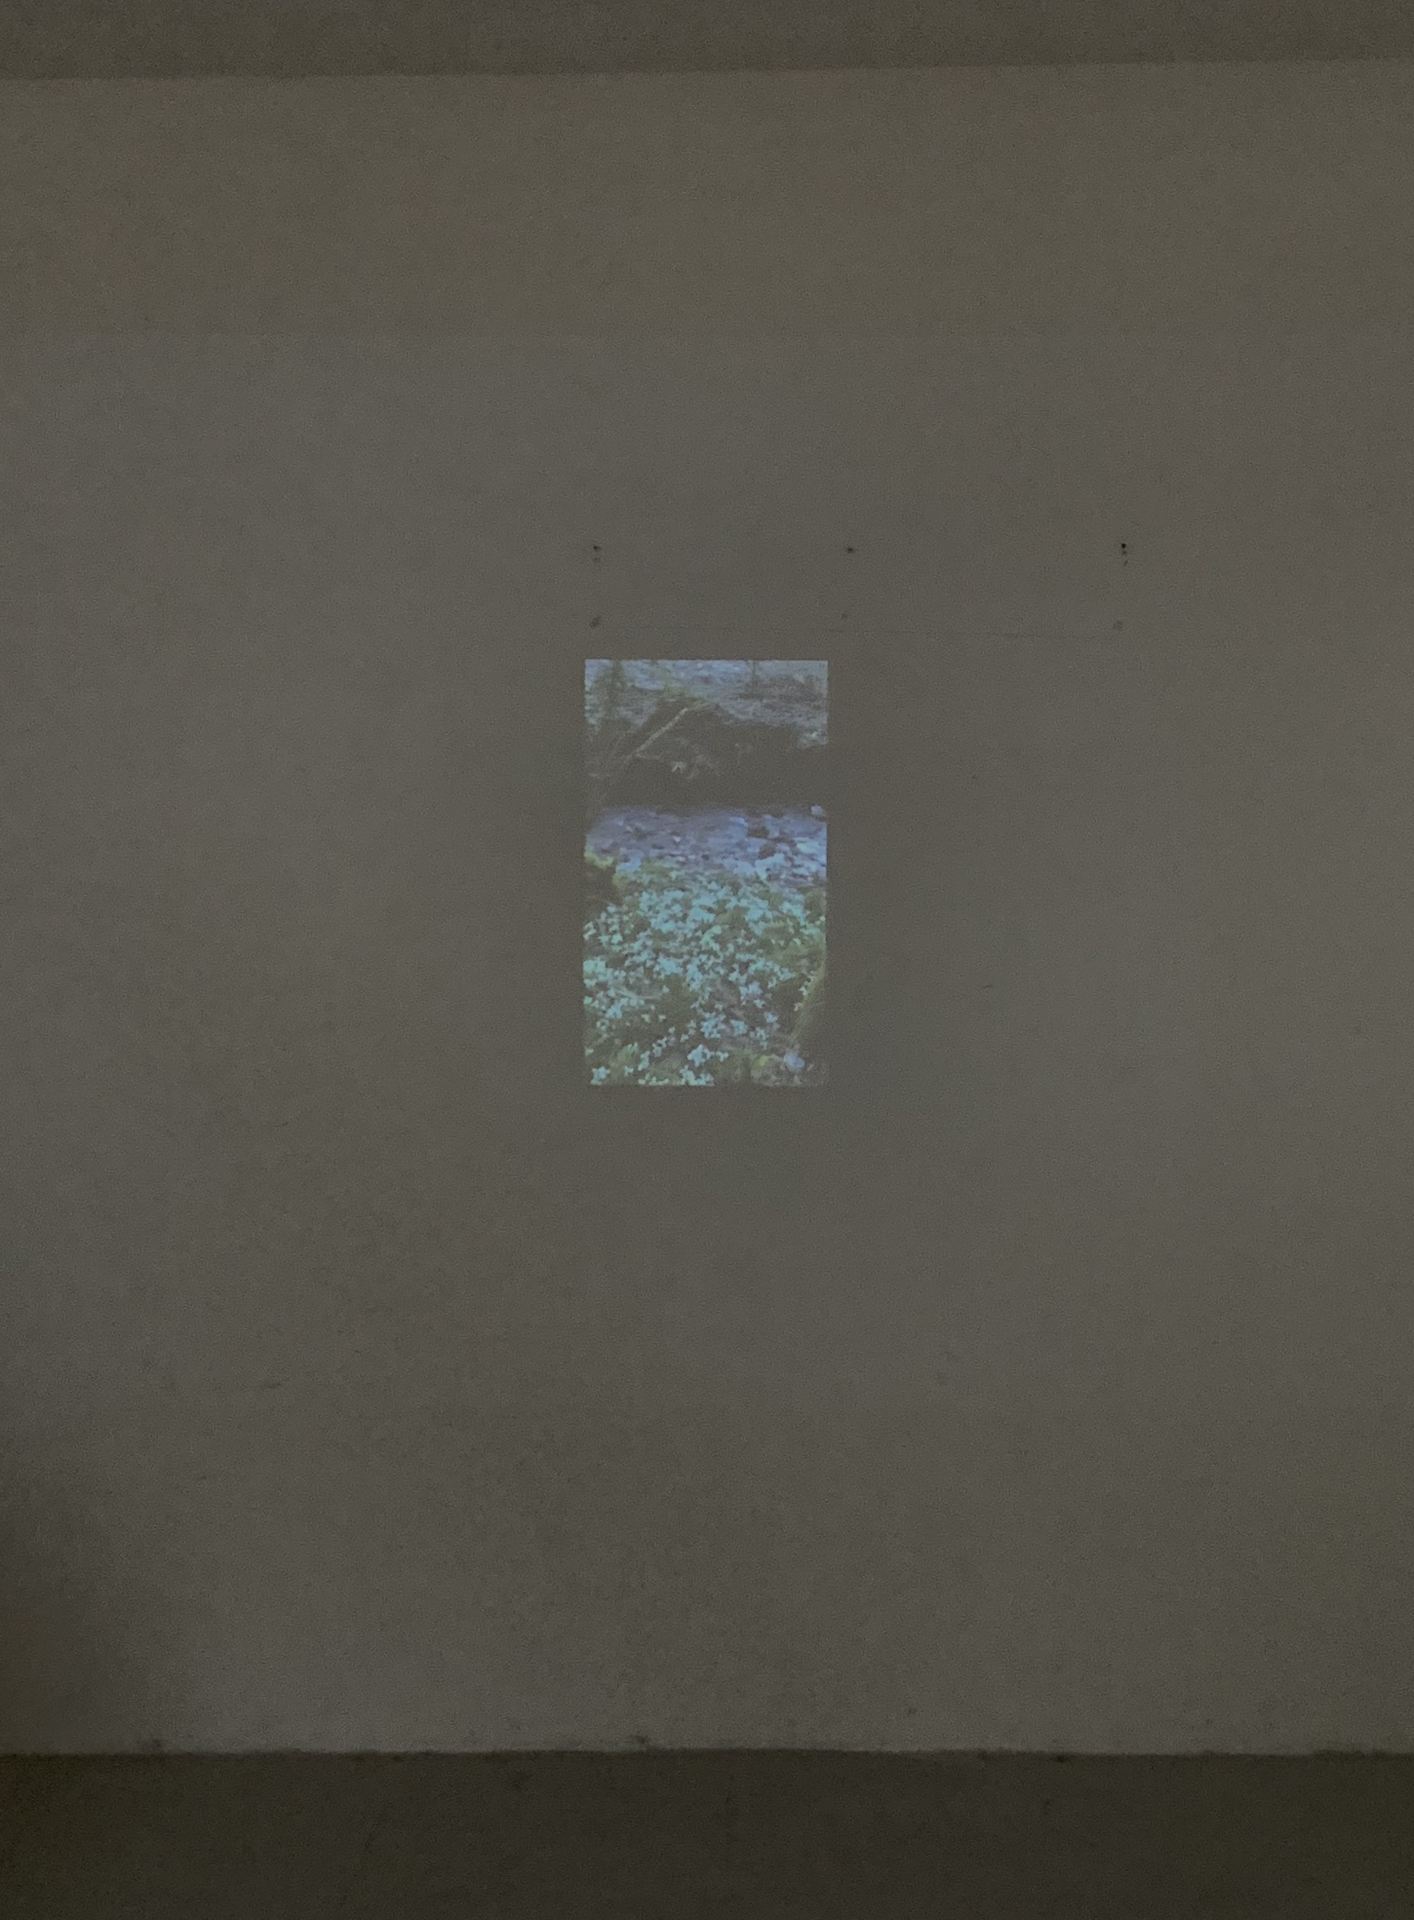 A portrait-oriented video-still of a field of flowers, projected onto a white wall.